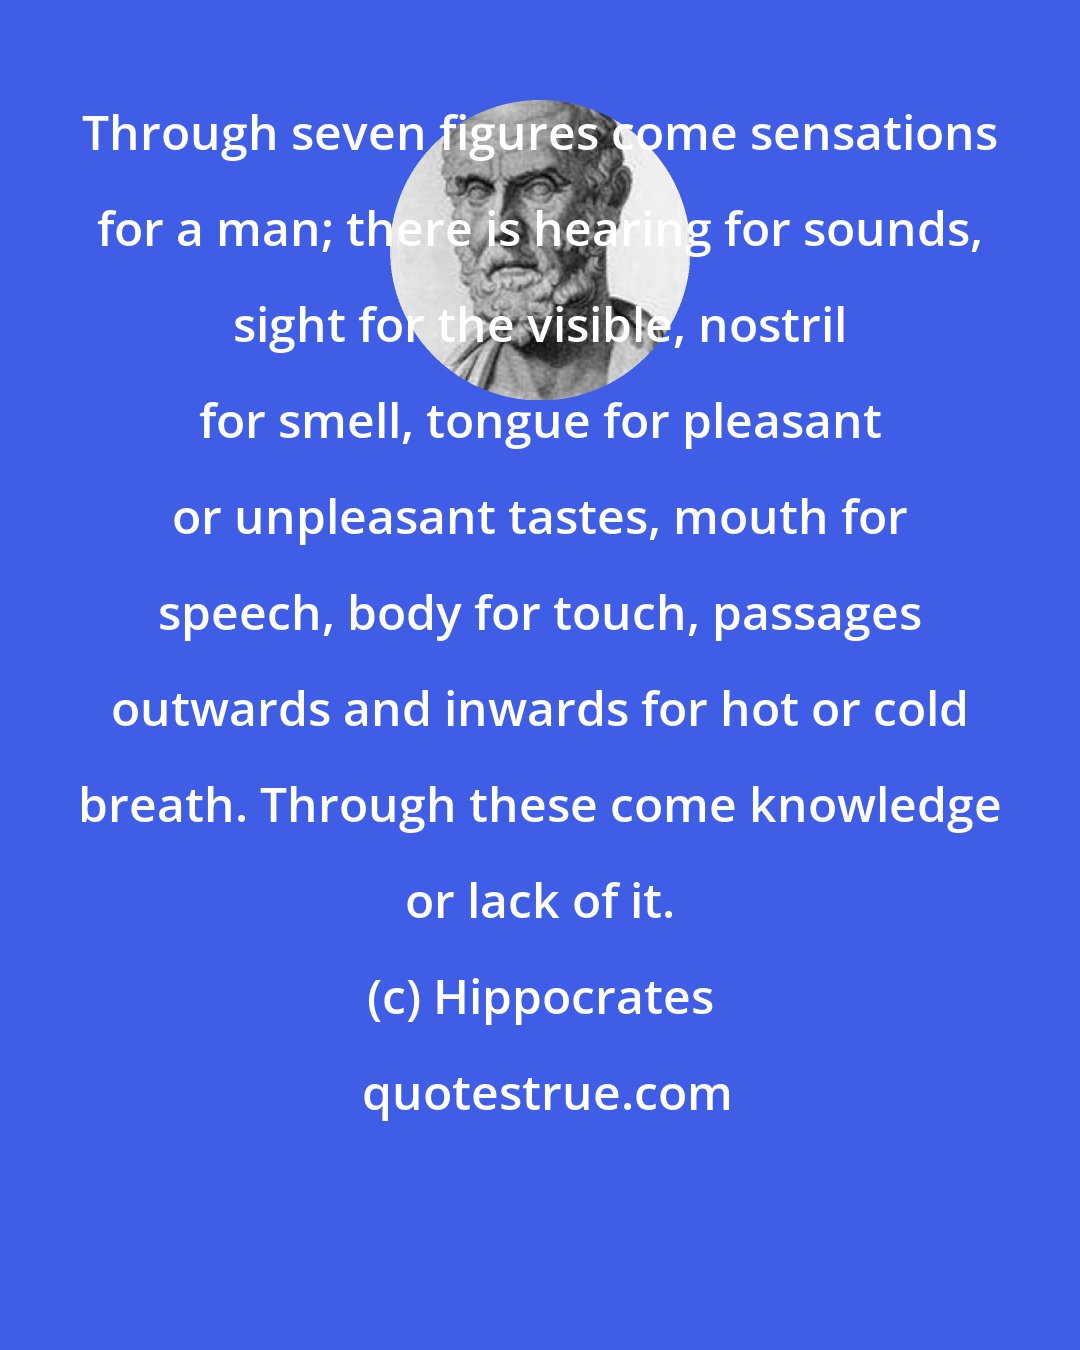 Hippocrates: Through seven figures come sensations for a man; there is hearing for sounds, sight for the visible, nostril for smell, tongue for pleasant or unpleasant tastes, mouth for speech, body for touch, passages outwards and inwards for hot or cold breath. Through these come knowledge or lack of it.